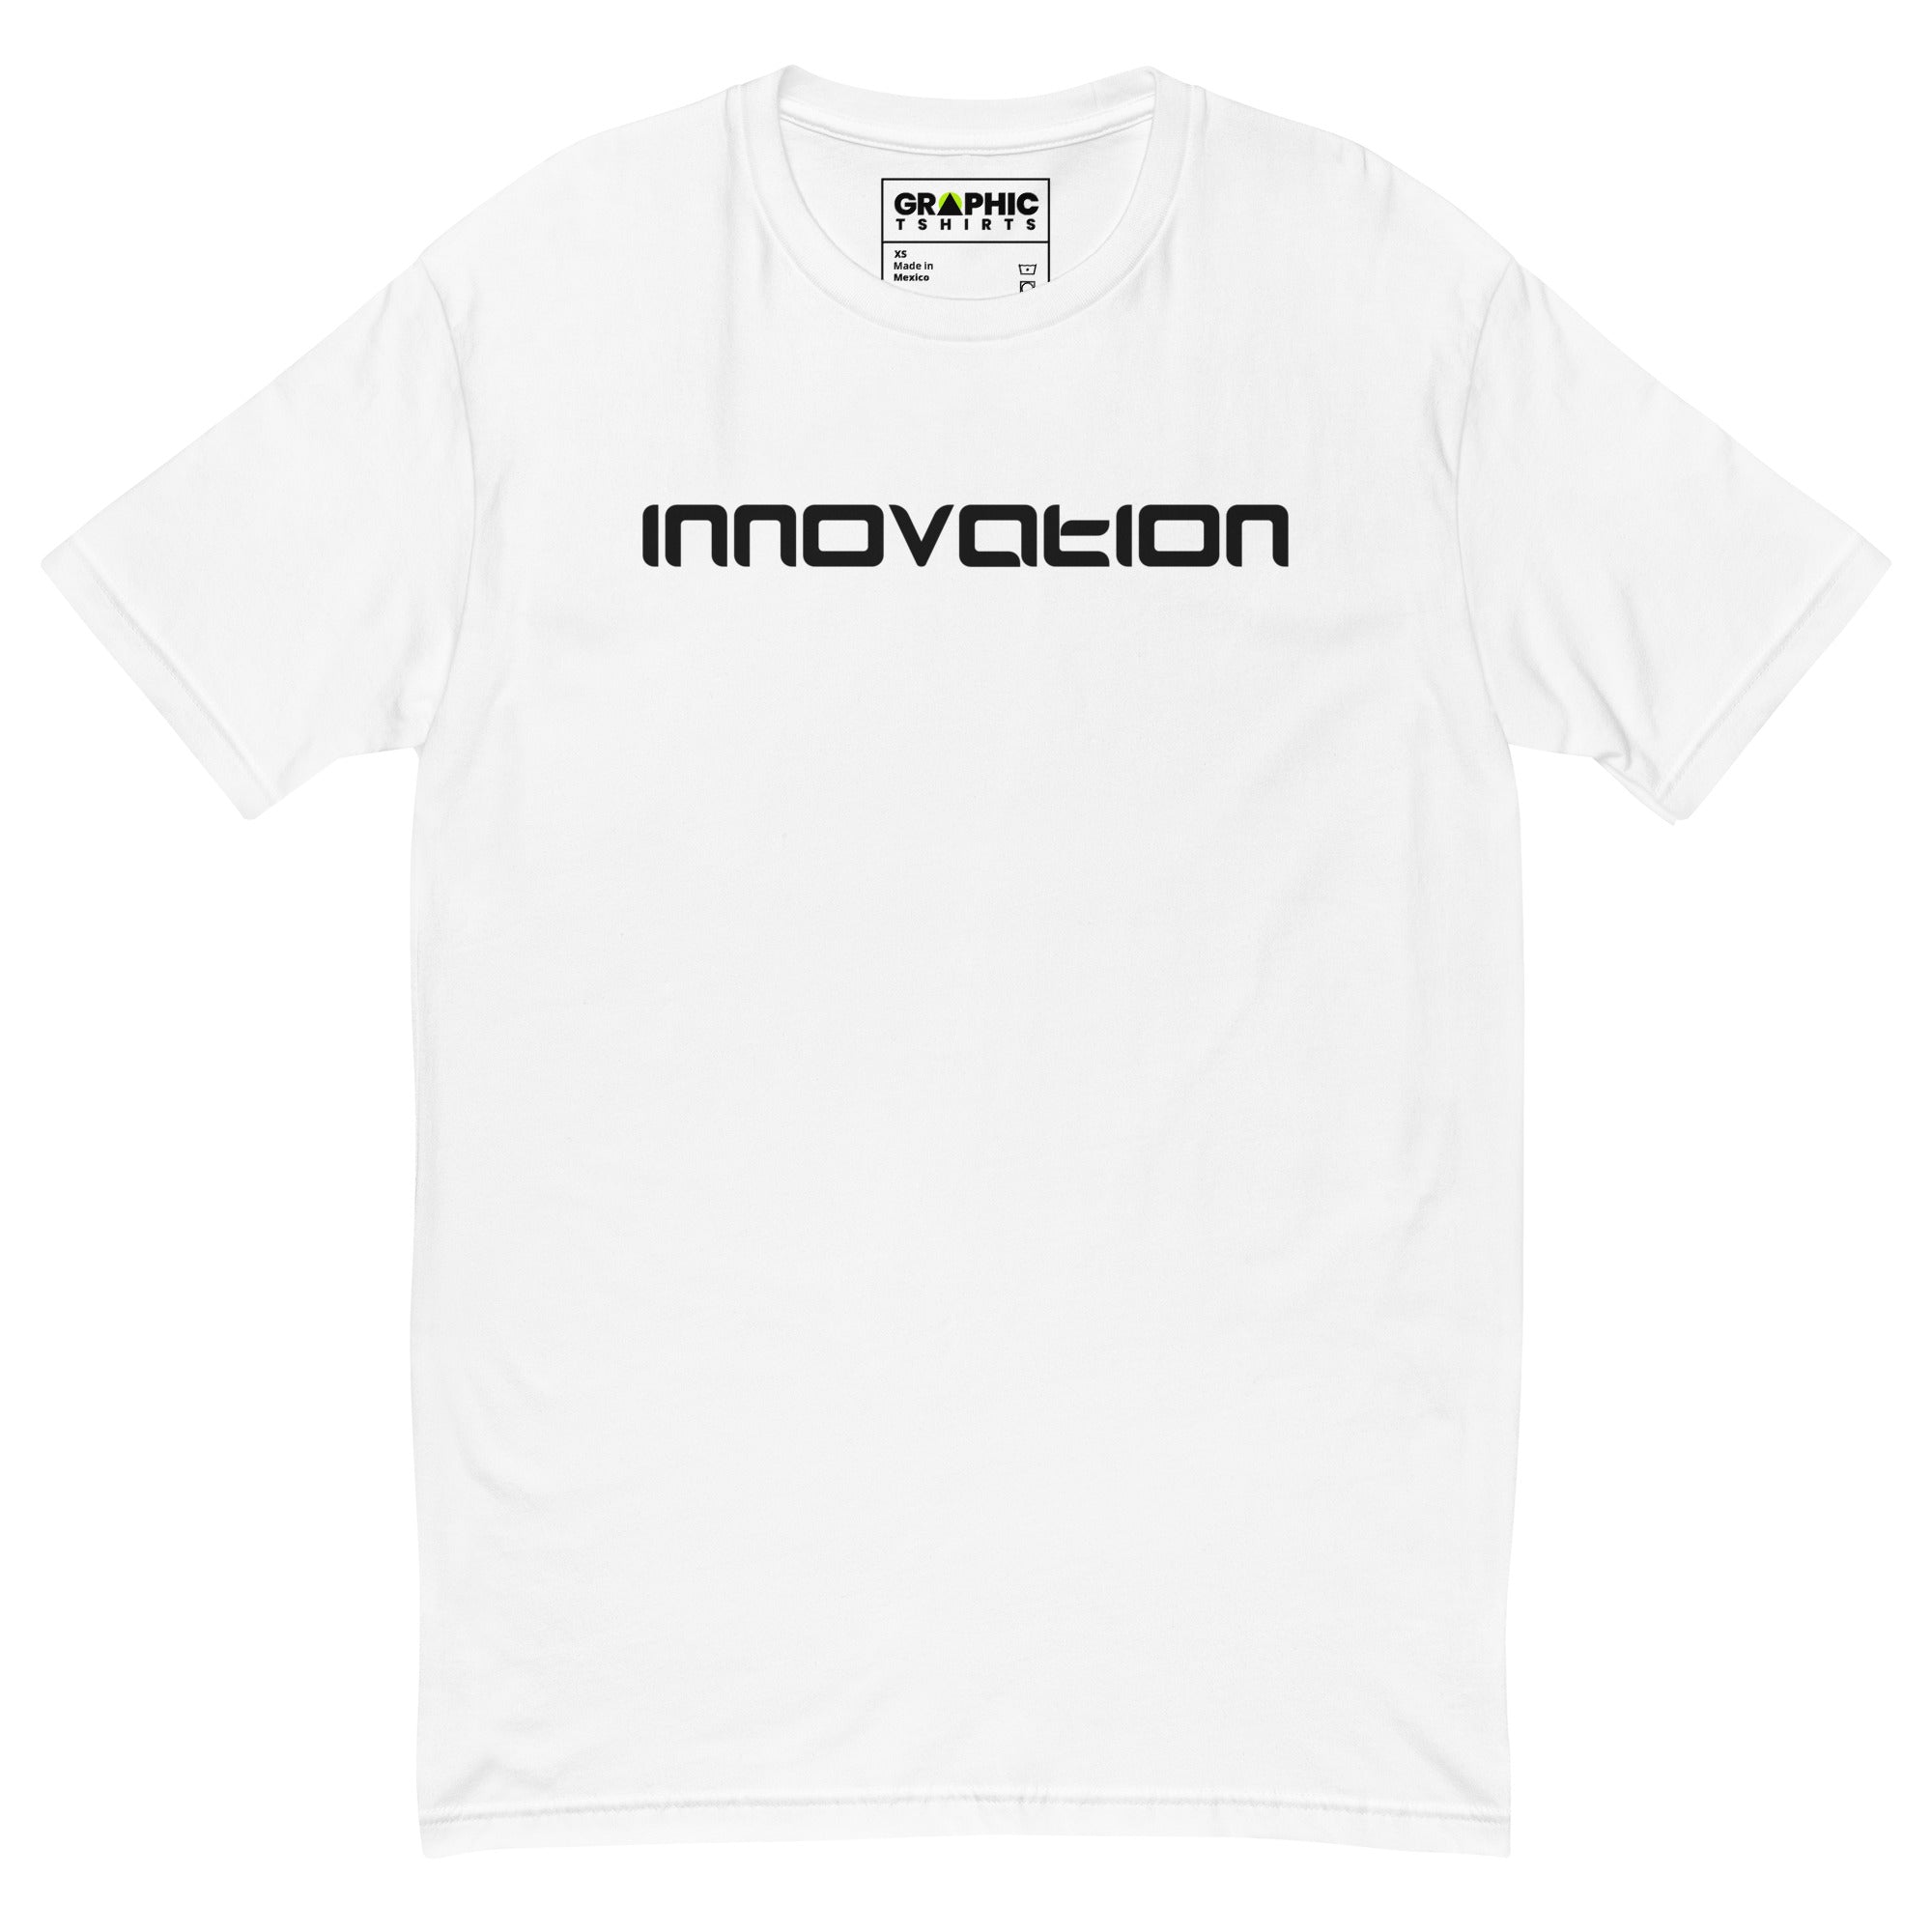 Men's Fitted T-Shirt - Innovation - GRAPHIC T-SHIRTS